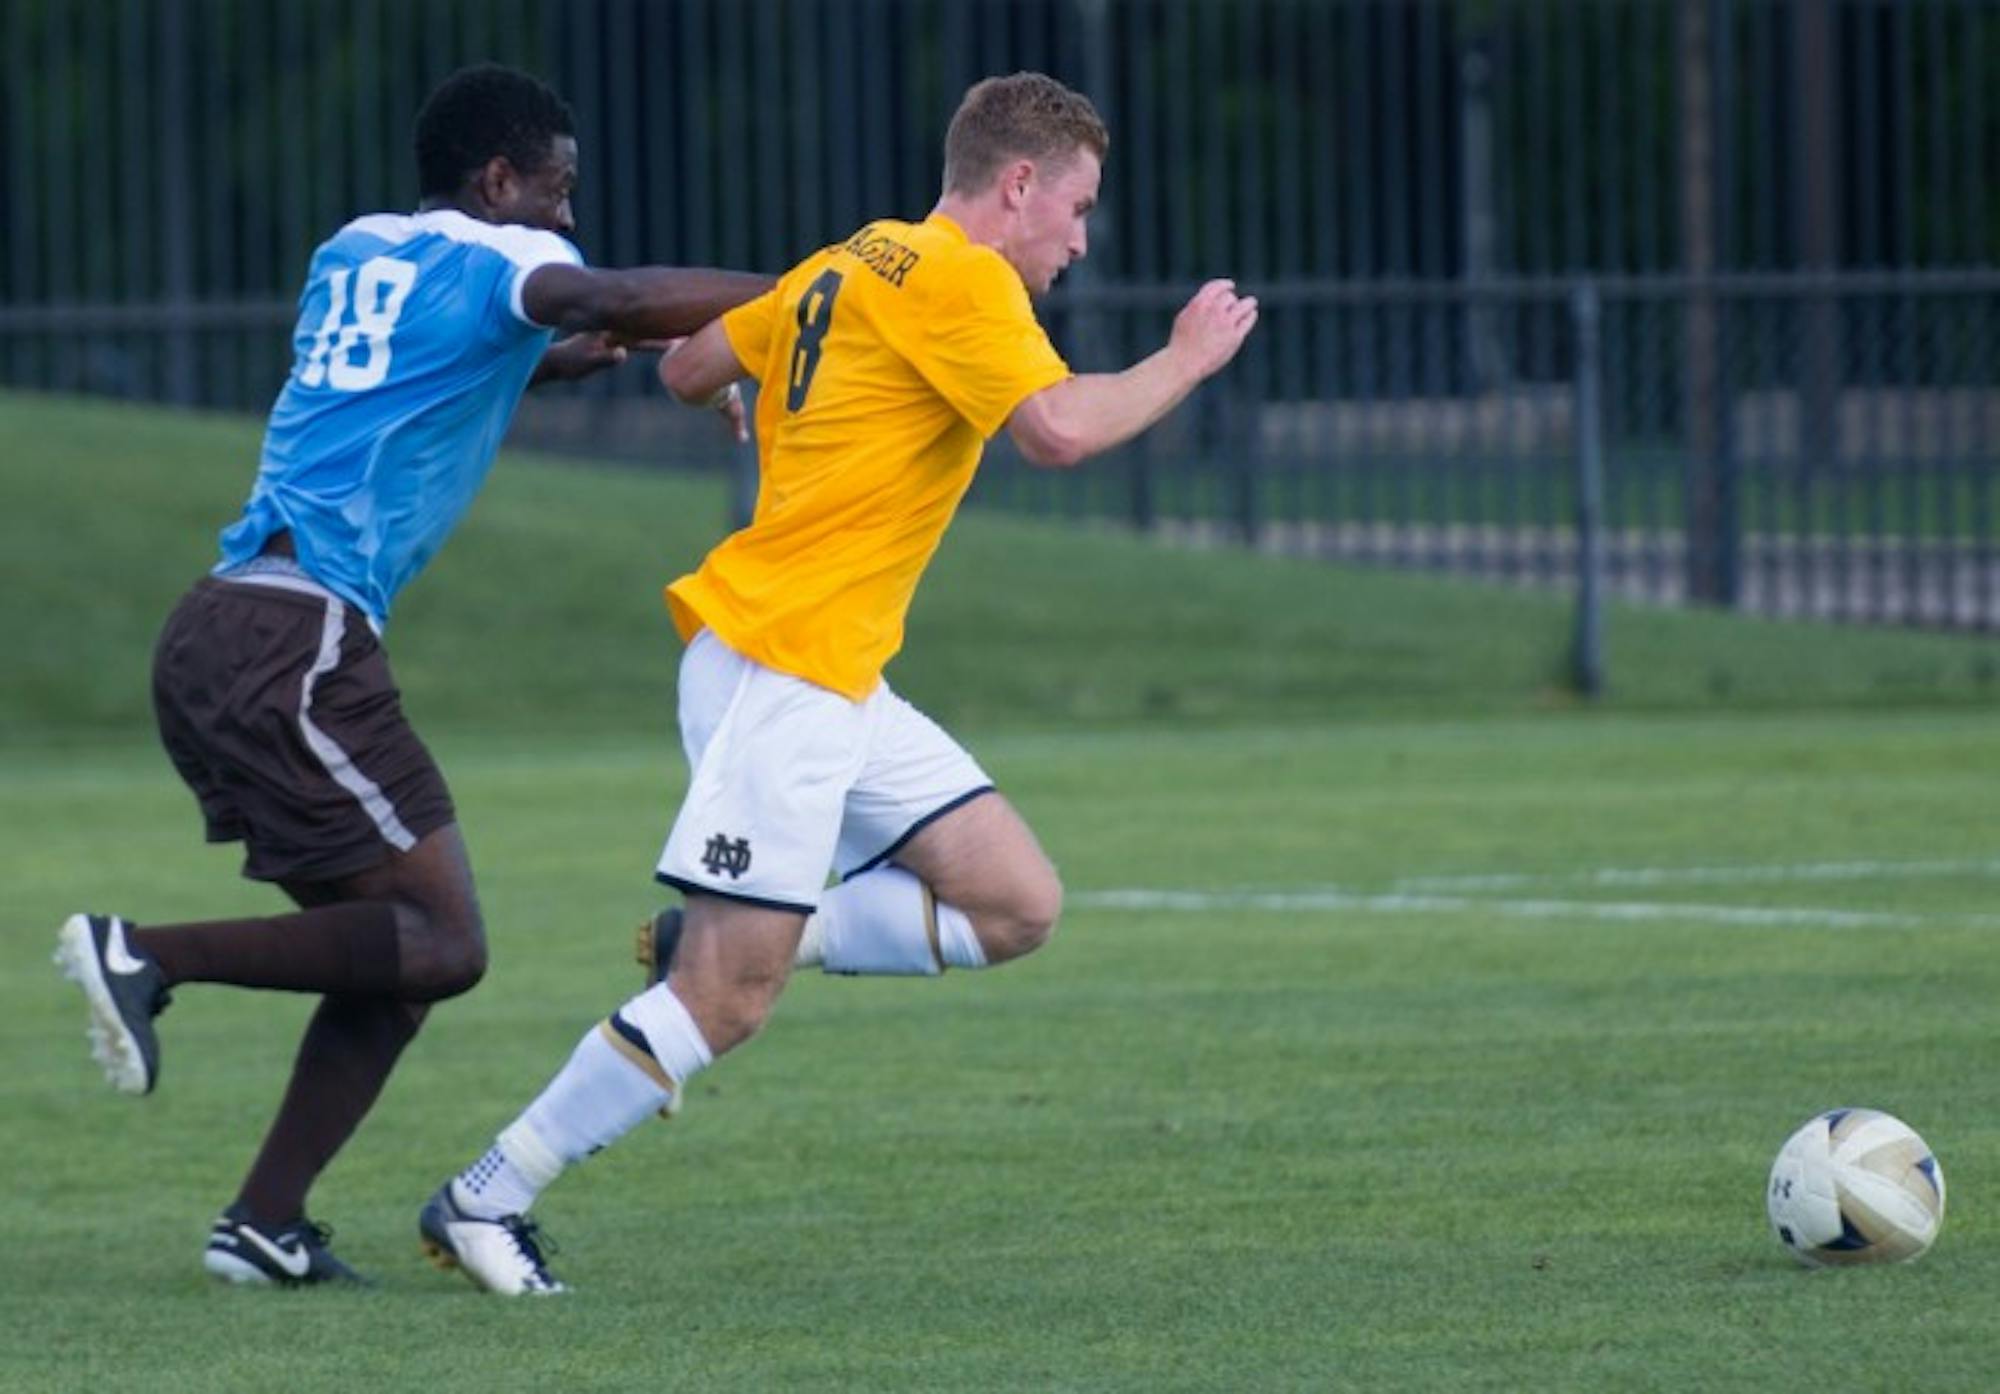 Notre Dame junior forward Jon Gallagher runs past a defender during Notre Dame’s 1-1 tie with Valparaiso on August 22 at Alumni Stadium. Gallagher leads the Irish this season in points with five.